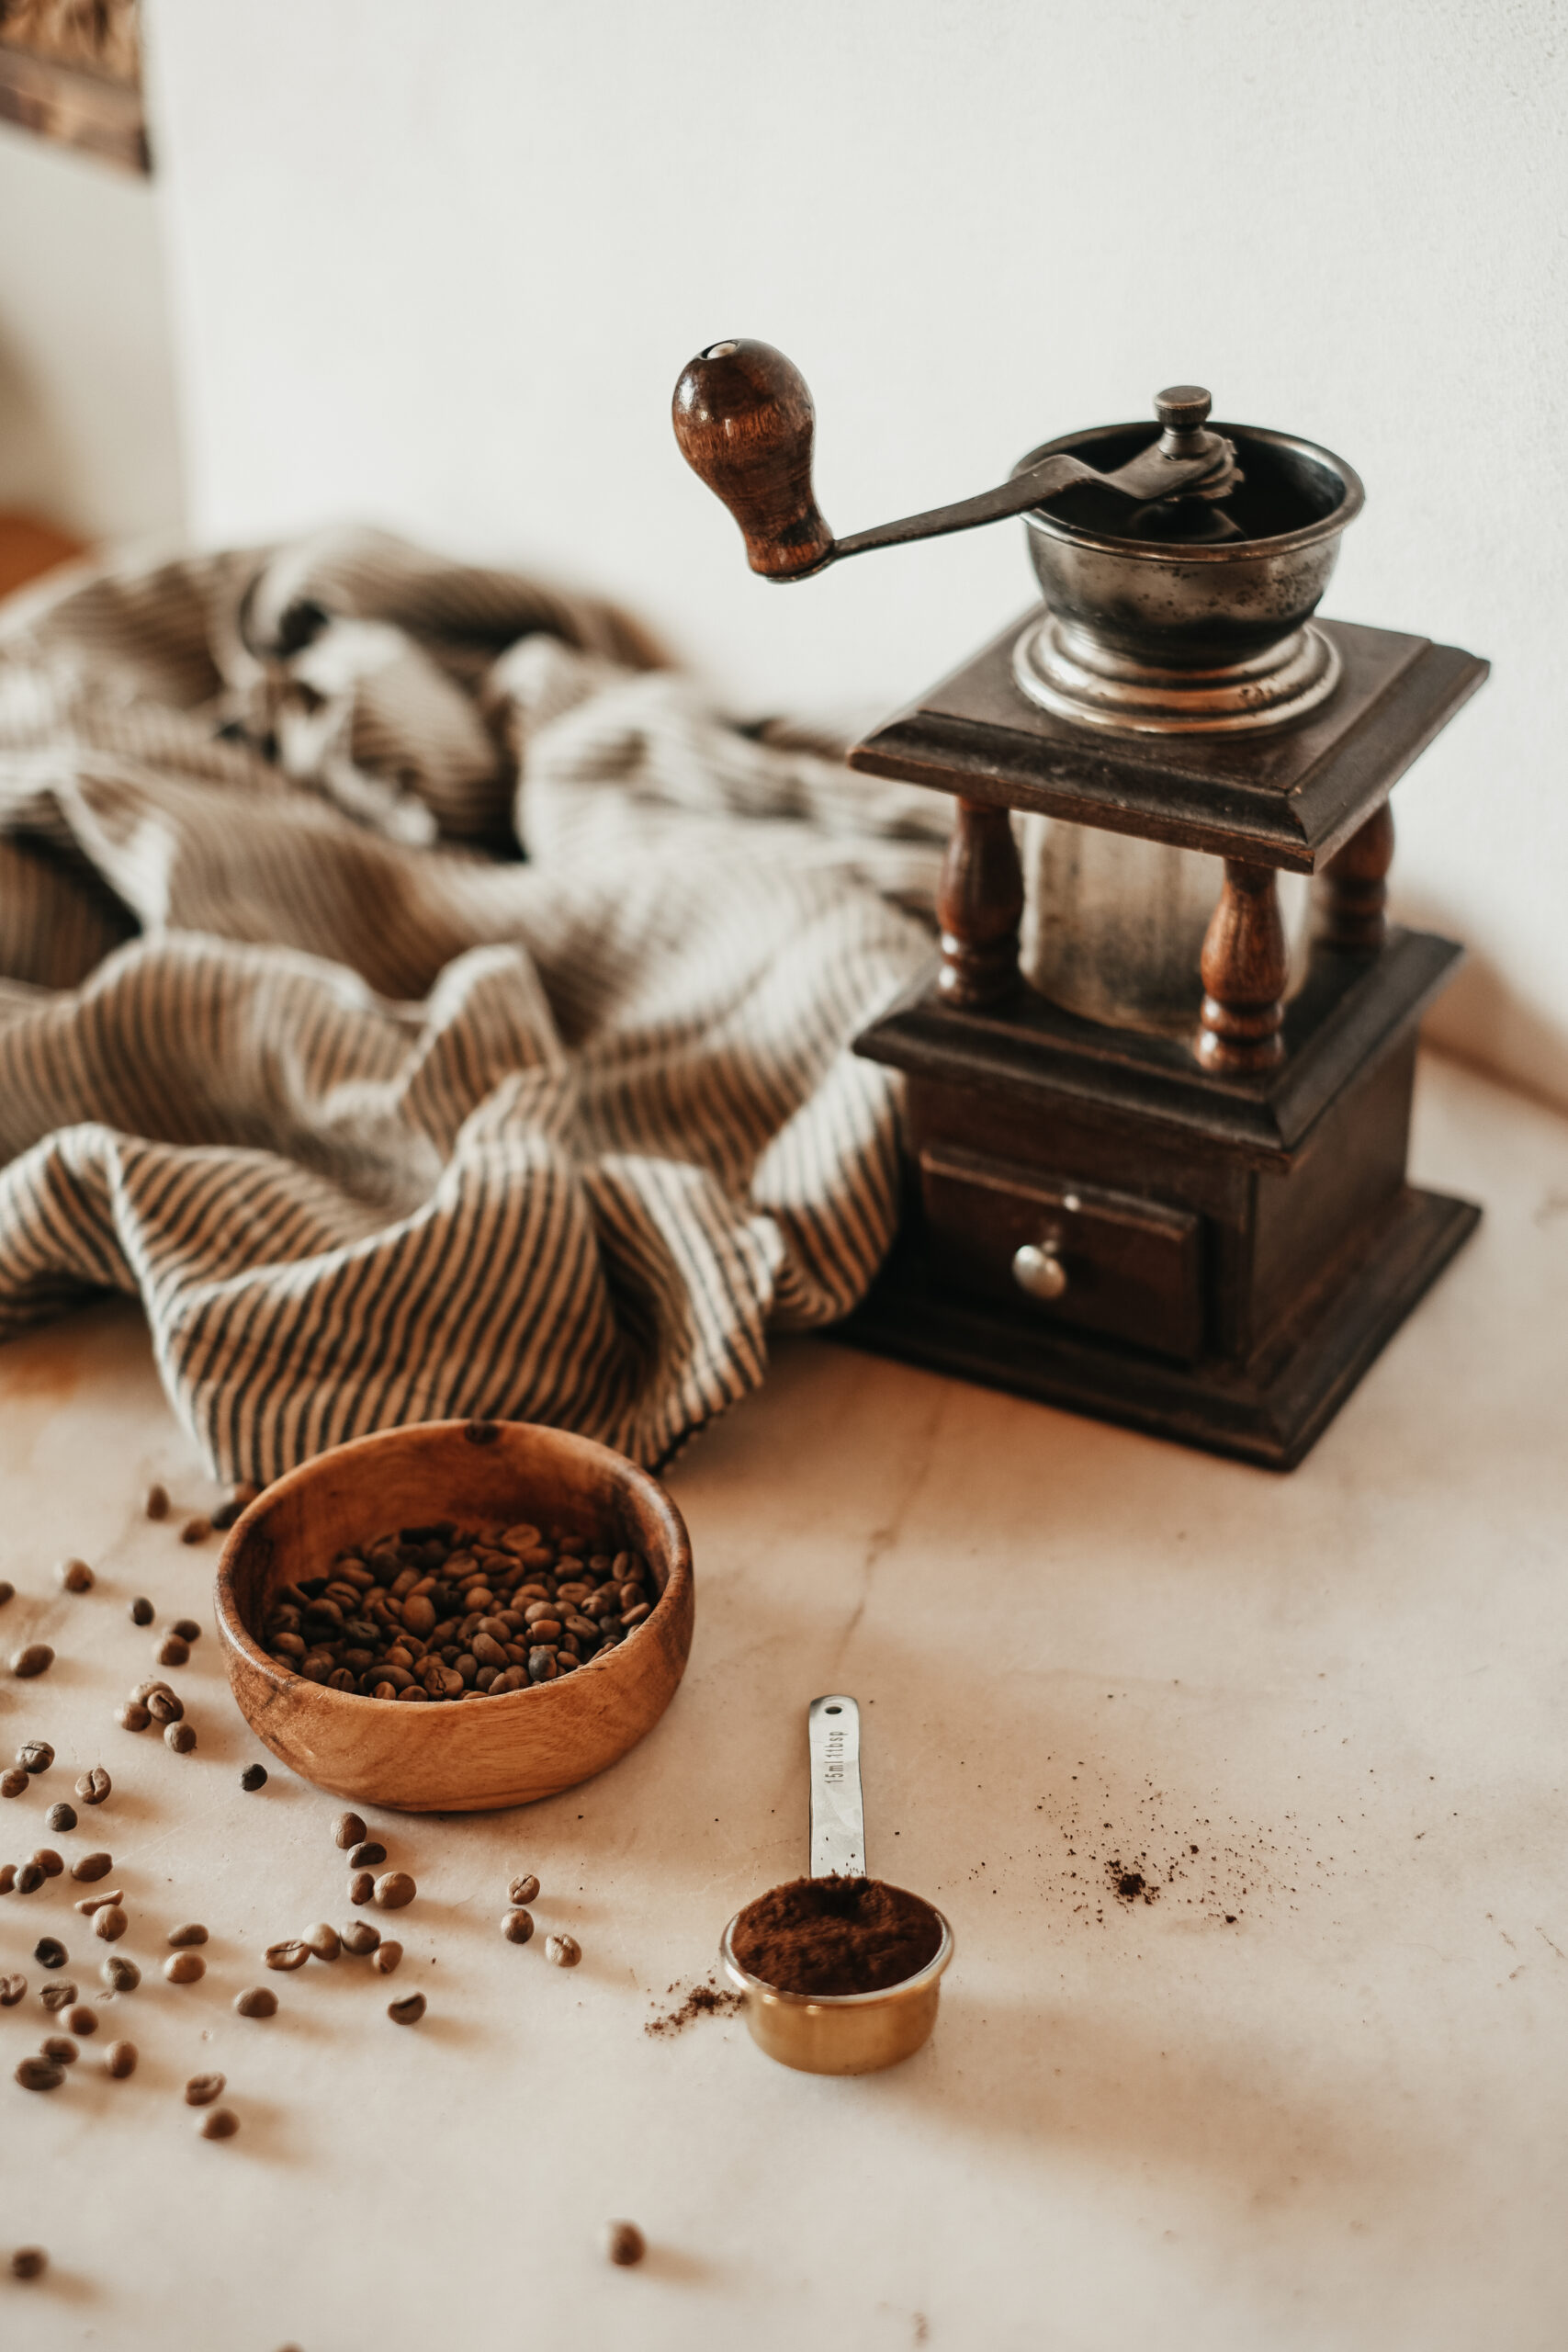 photo of coffee grinder, wooden bowl of coffee beans, and ground coffee in a small measuring cup